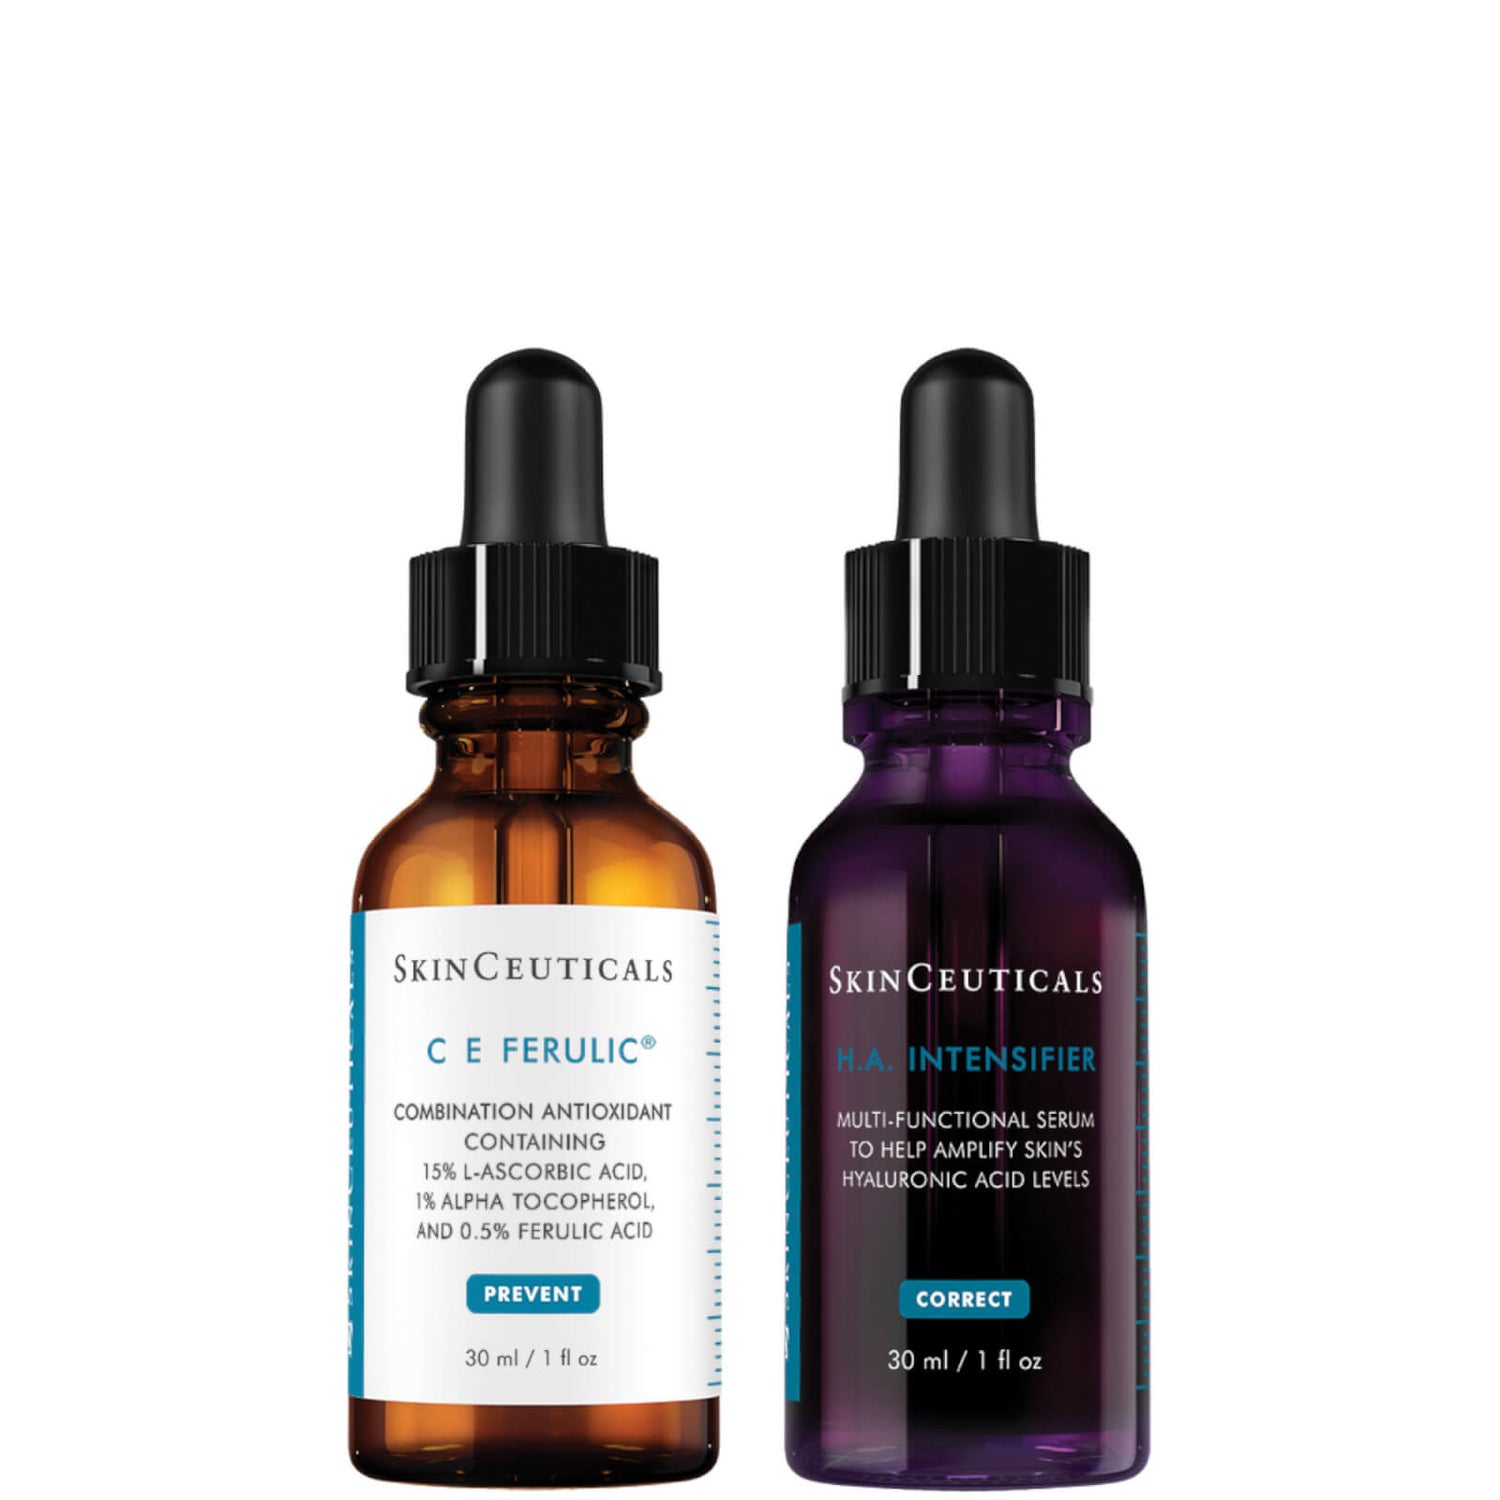 SkinCeuticals Anti-Aging Refine and Plump Regimen with Vitamin C and Hyaluronic Acid